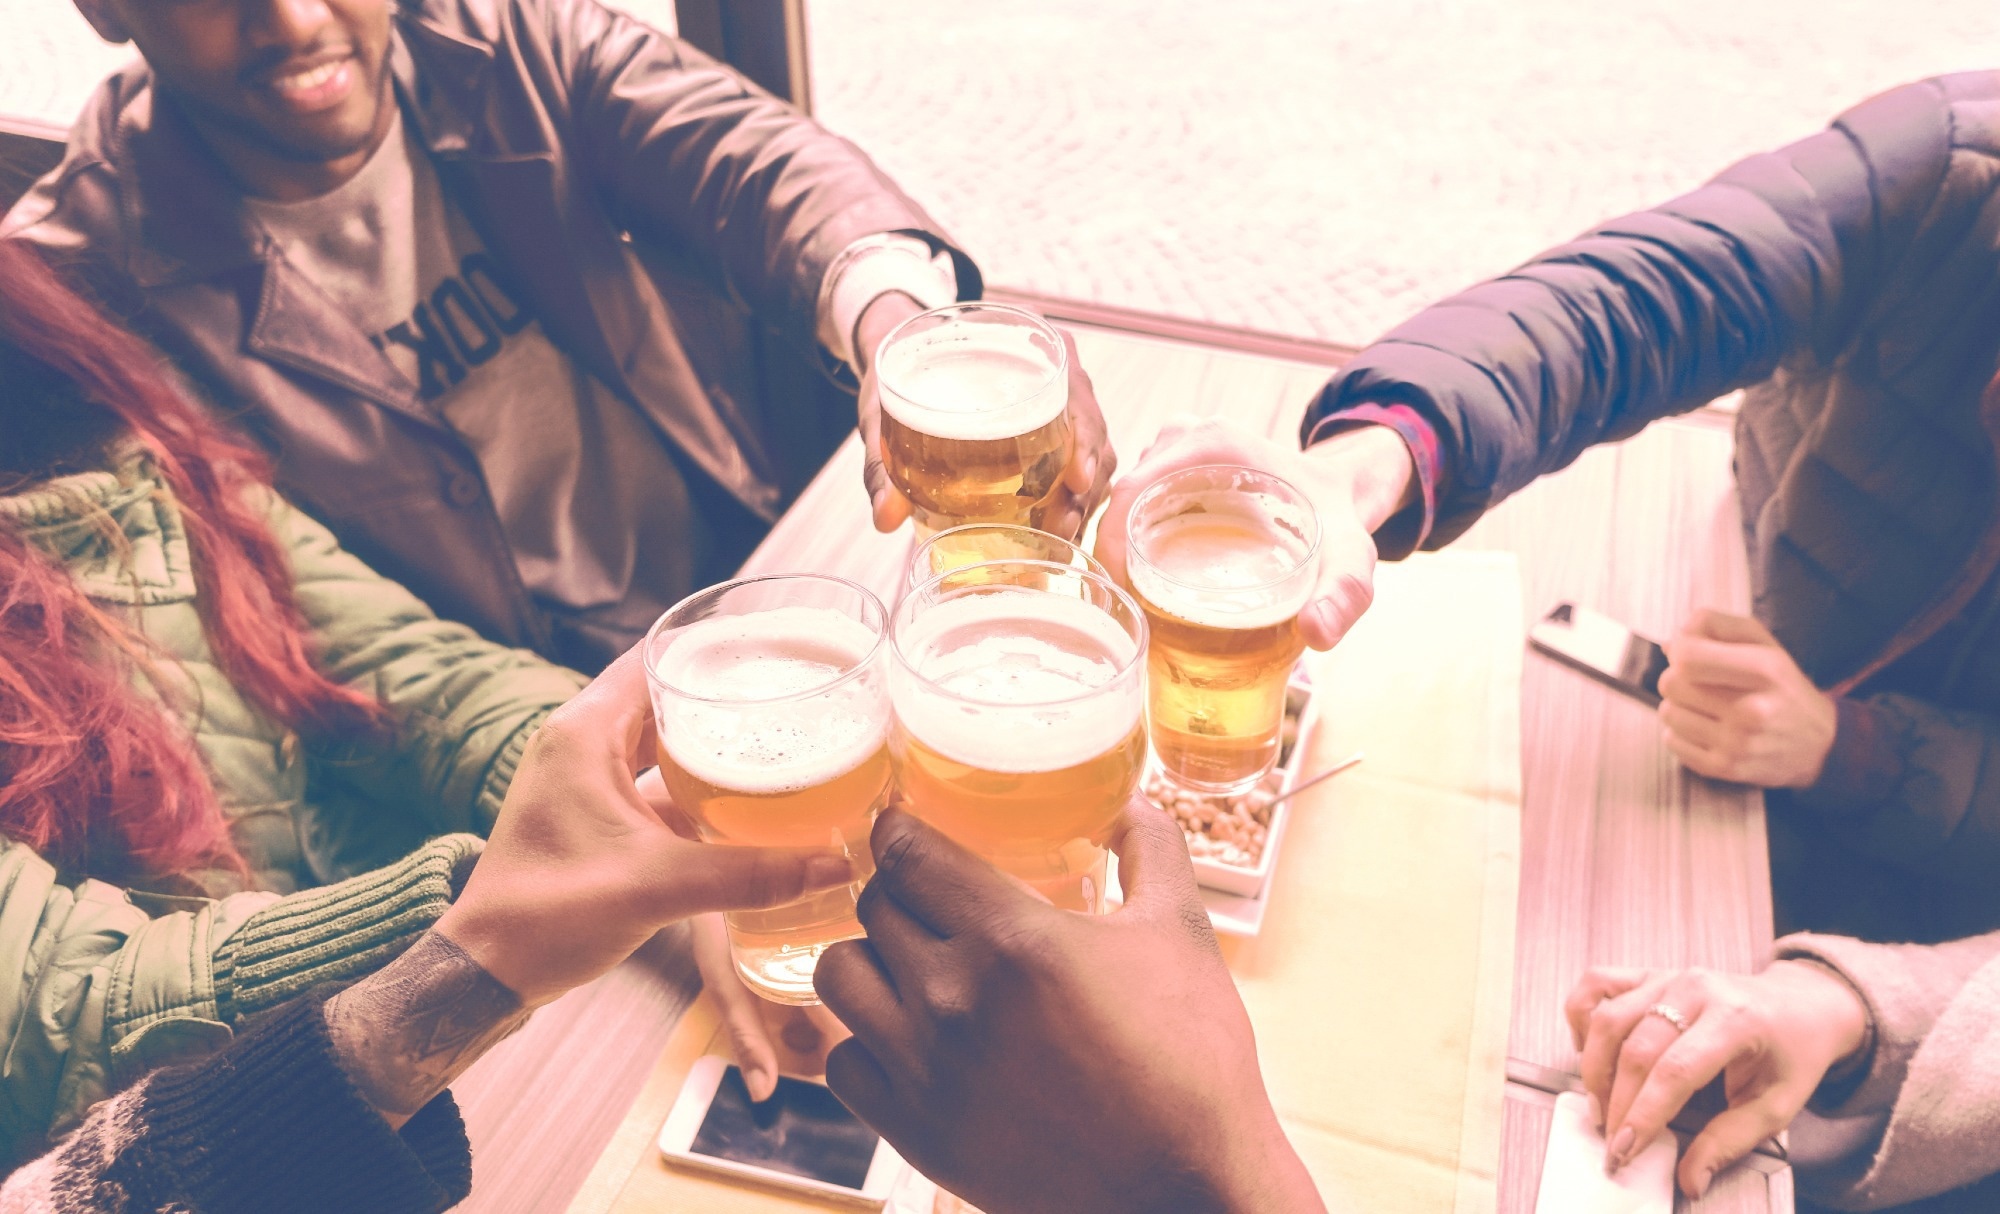 Study: Effect of a smartphone intervention as a secondary prevention for use among university students with unhealthy alcohol use: randomised controlled trial. Image Credit: Akhenaton Images/Shutterstock.com